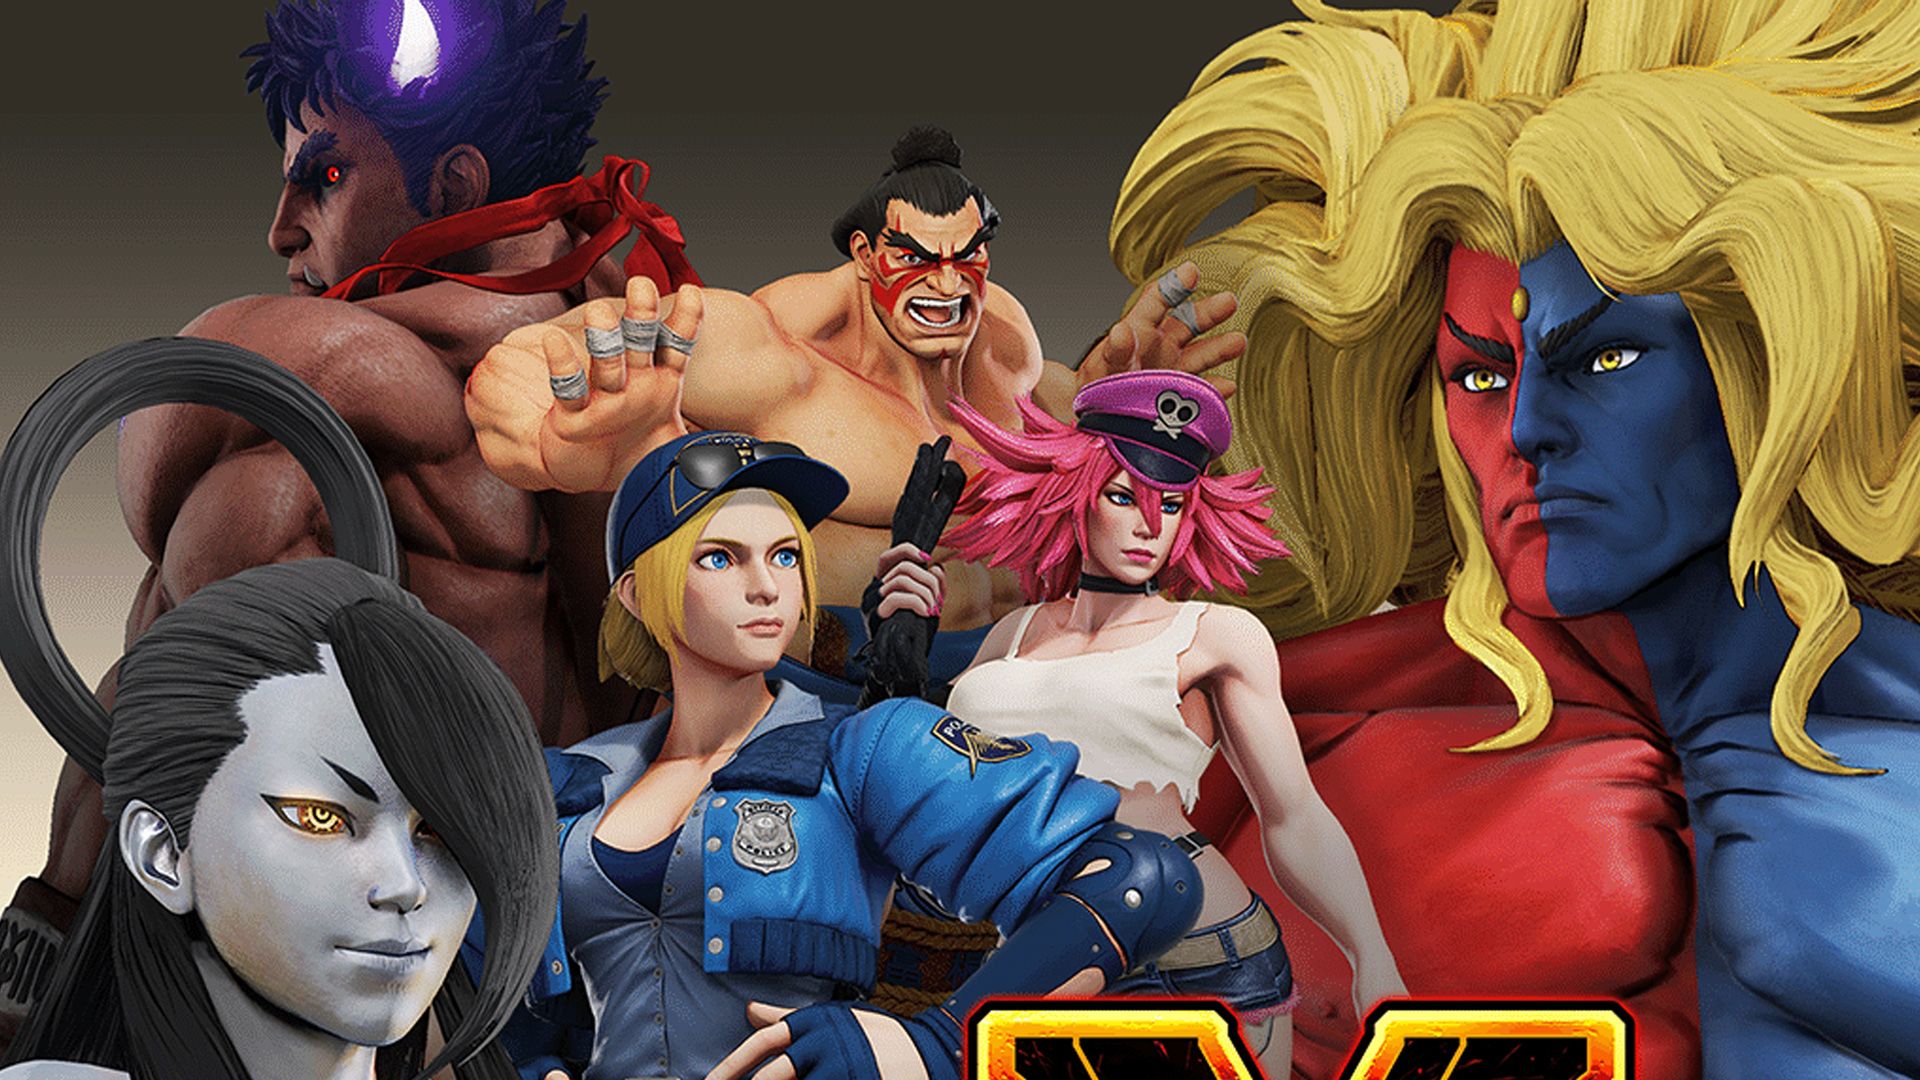 Street Fighter V: Champion Edition: Seth, release date, and more